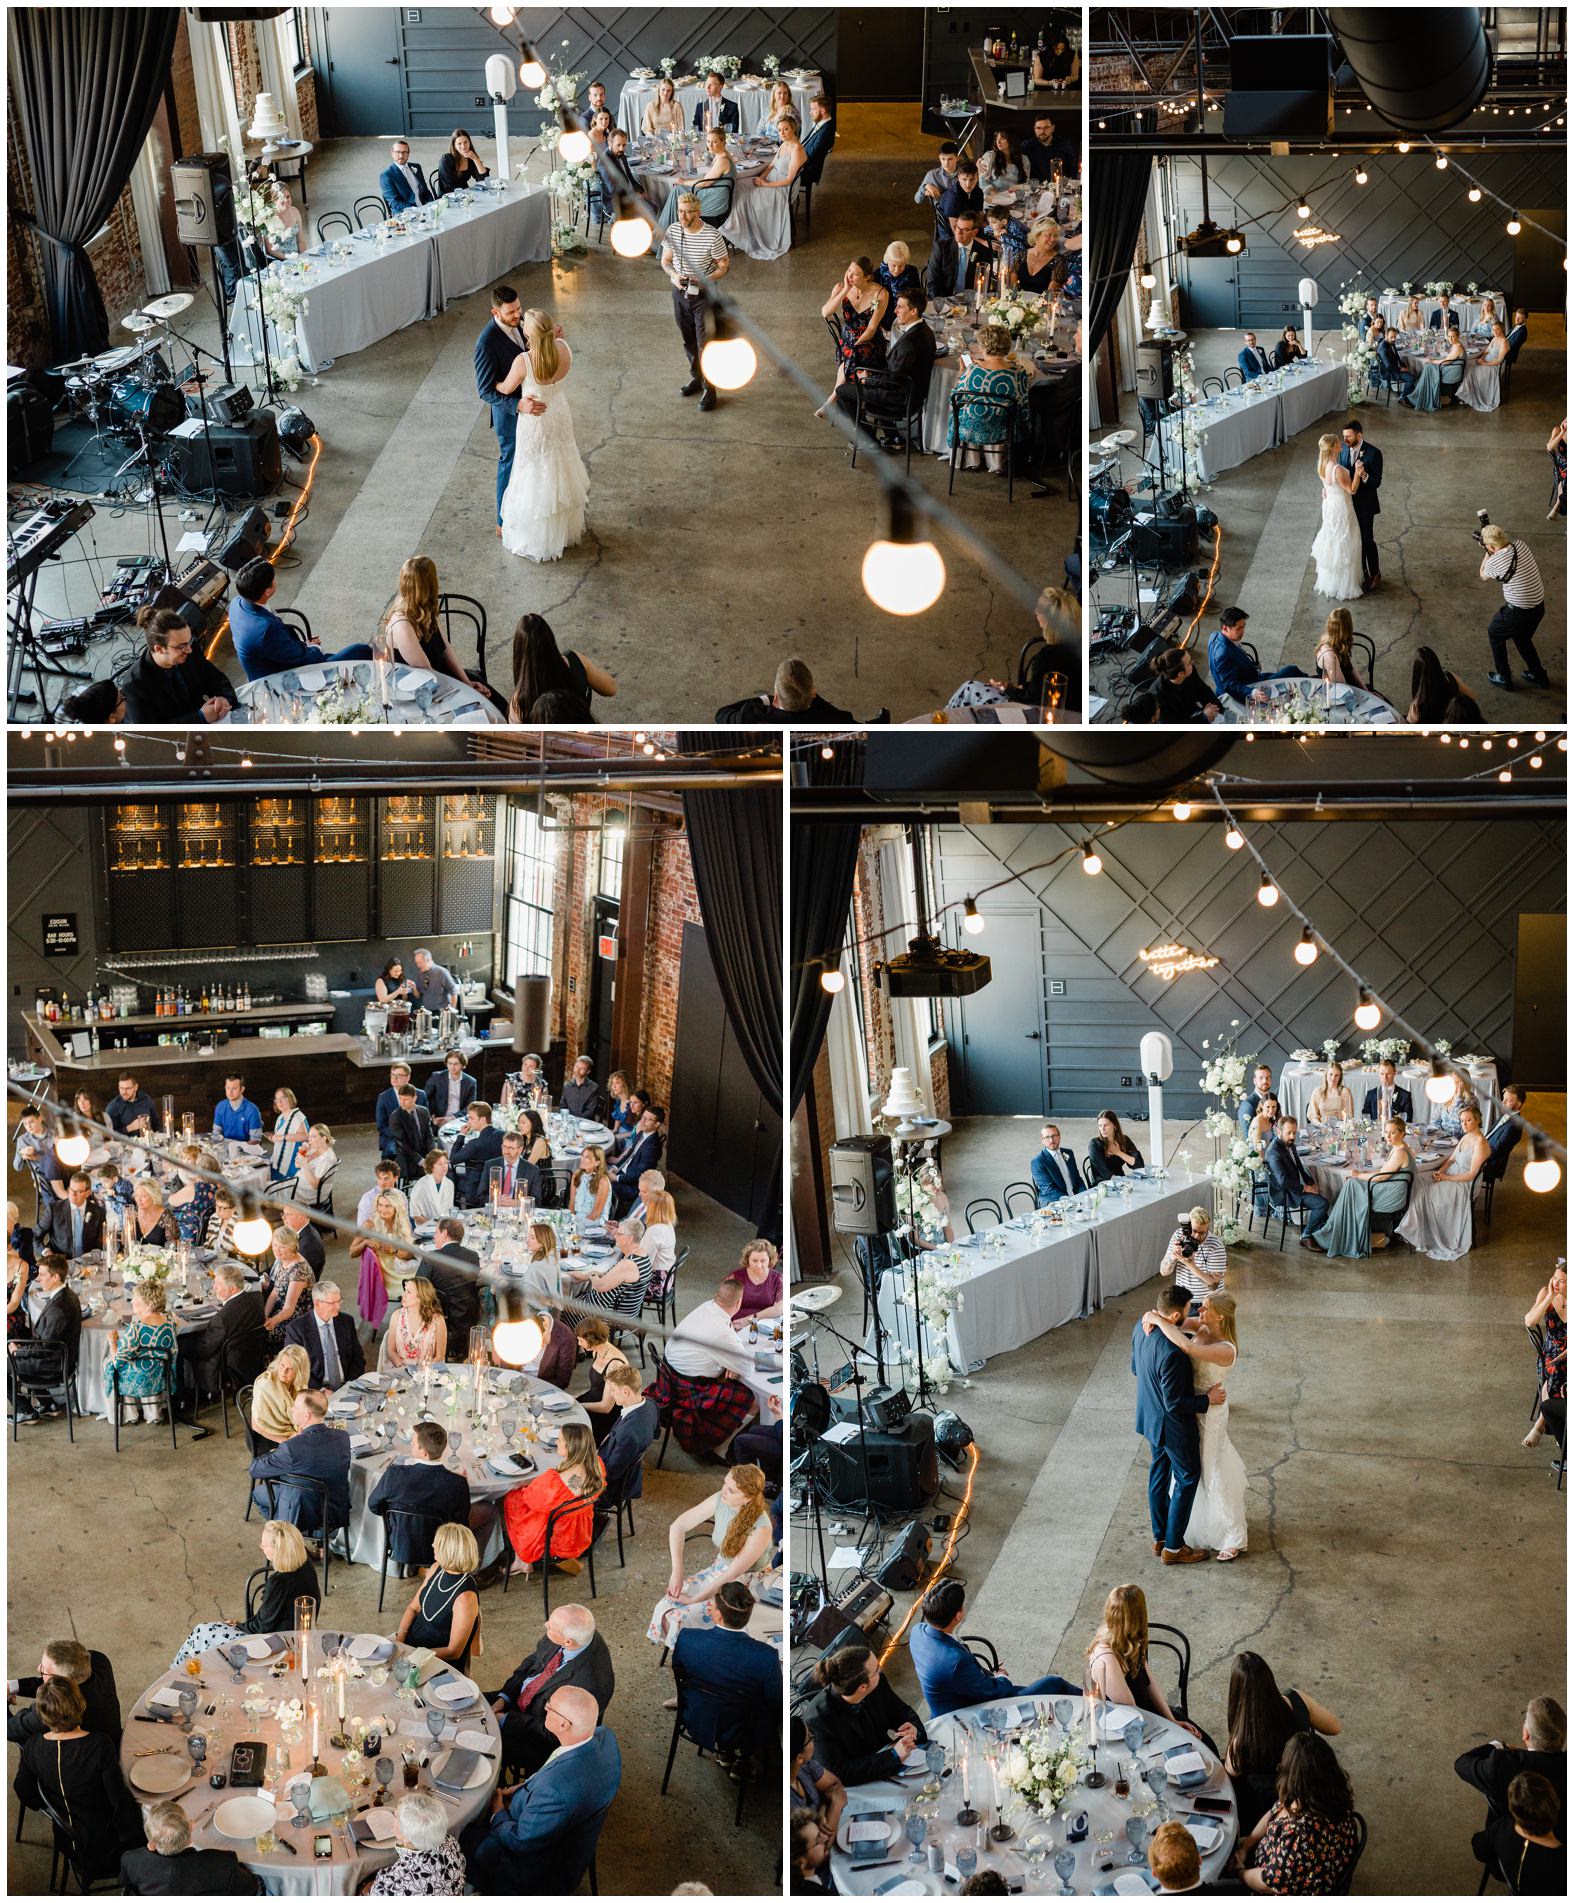 Adam lowe photography, wedding, Columbus, Ohio, fashion, editorial, fine art, Edison 777, downtown, love, art, Tanya Irelan Planner, North 4th Corridor, Dr awkward band, Fiori Florals, Your invited paper, saber cakes, Aiden and grace, Isabelle Lynn bridal, make up artistry by Kelley, Alex and ragrecco, Jenny roon Nyc, pursuit yourself, Jenni Stuart jewelry, dolce vita